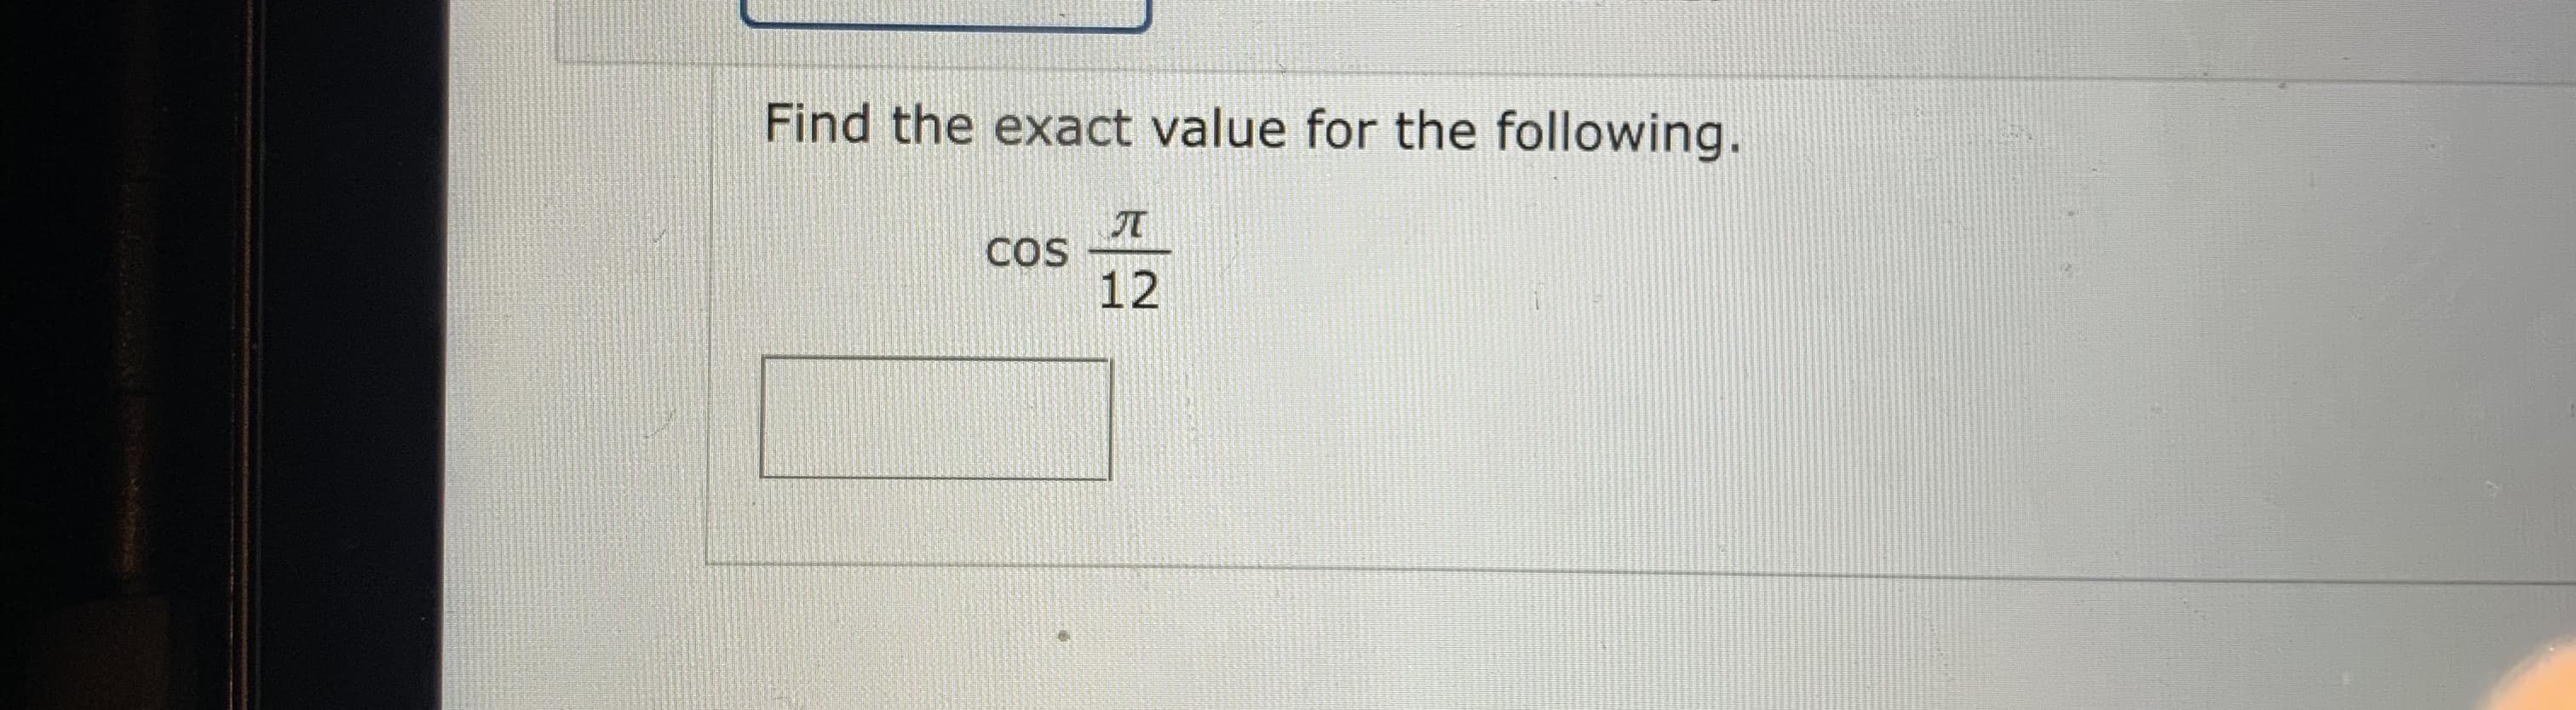 Find the exact value for the following.
COS
12
